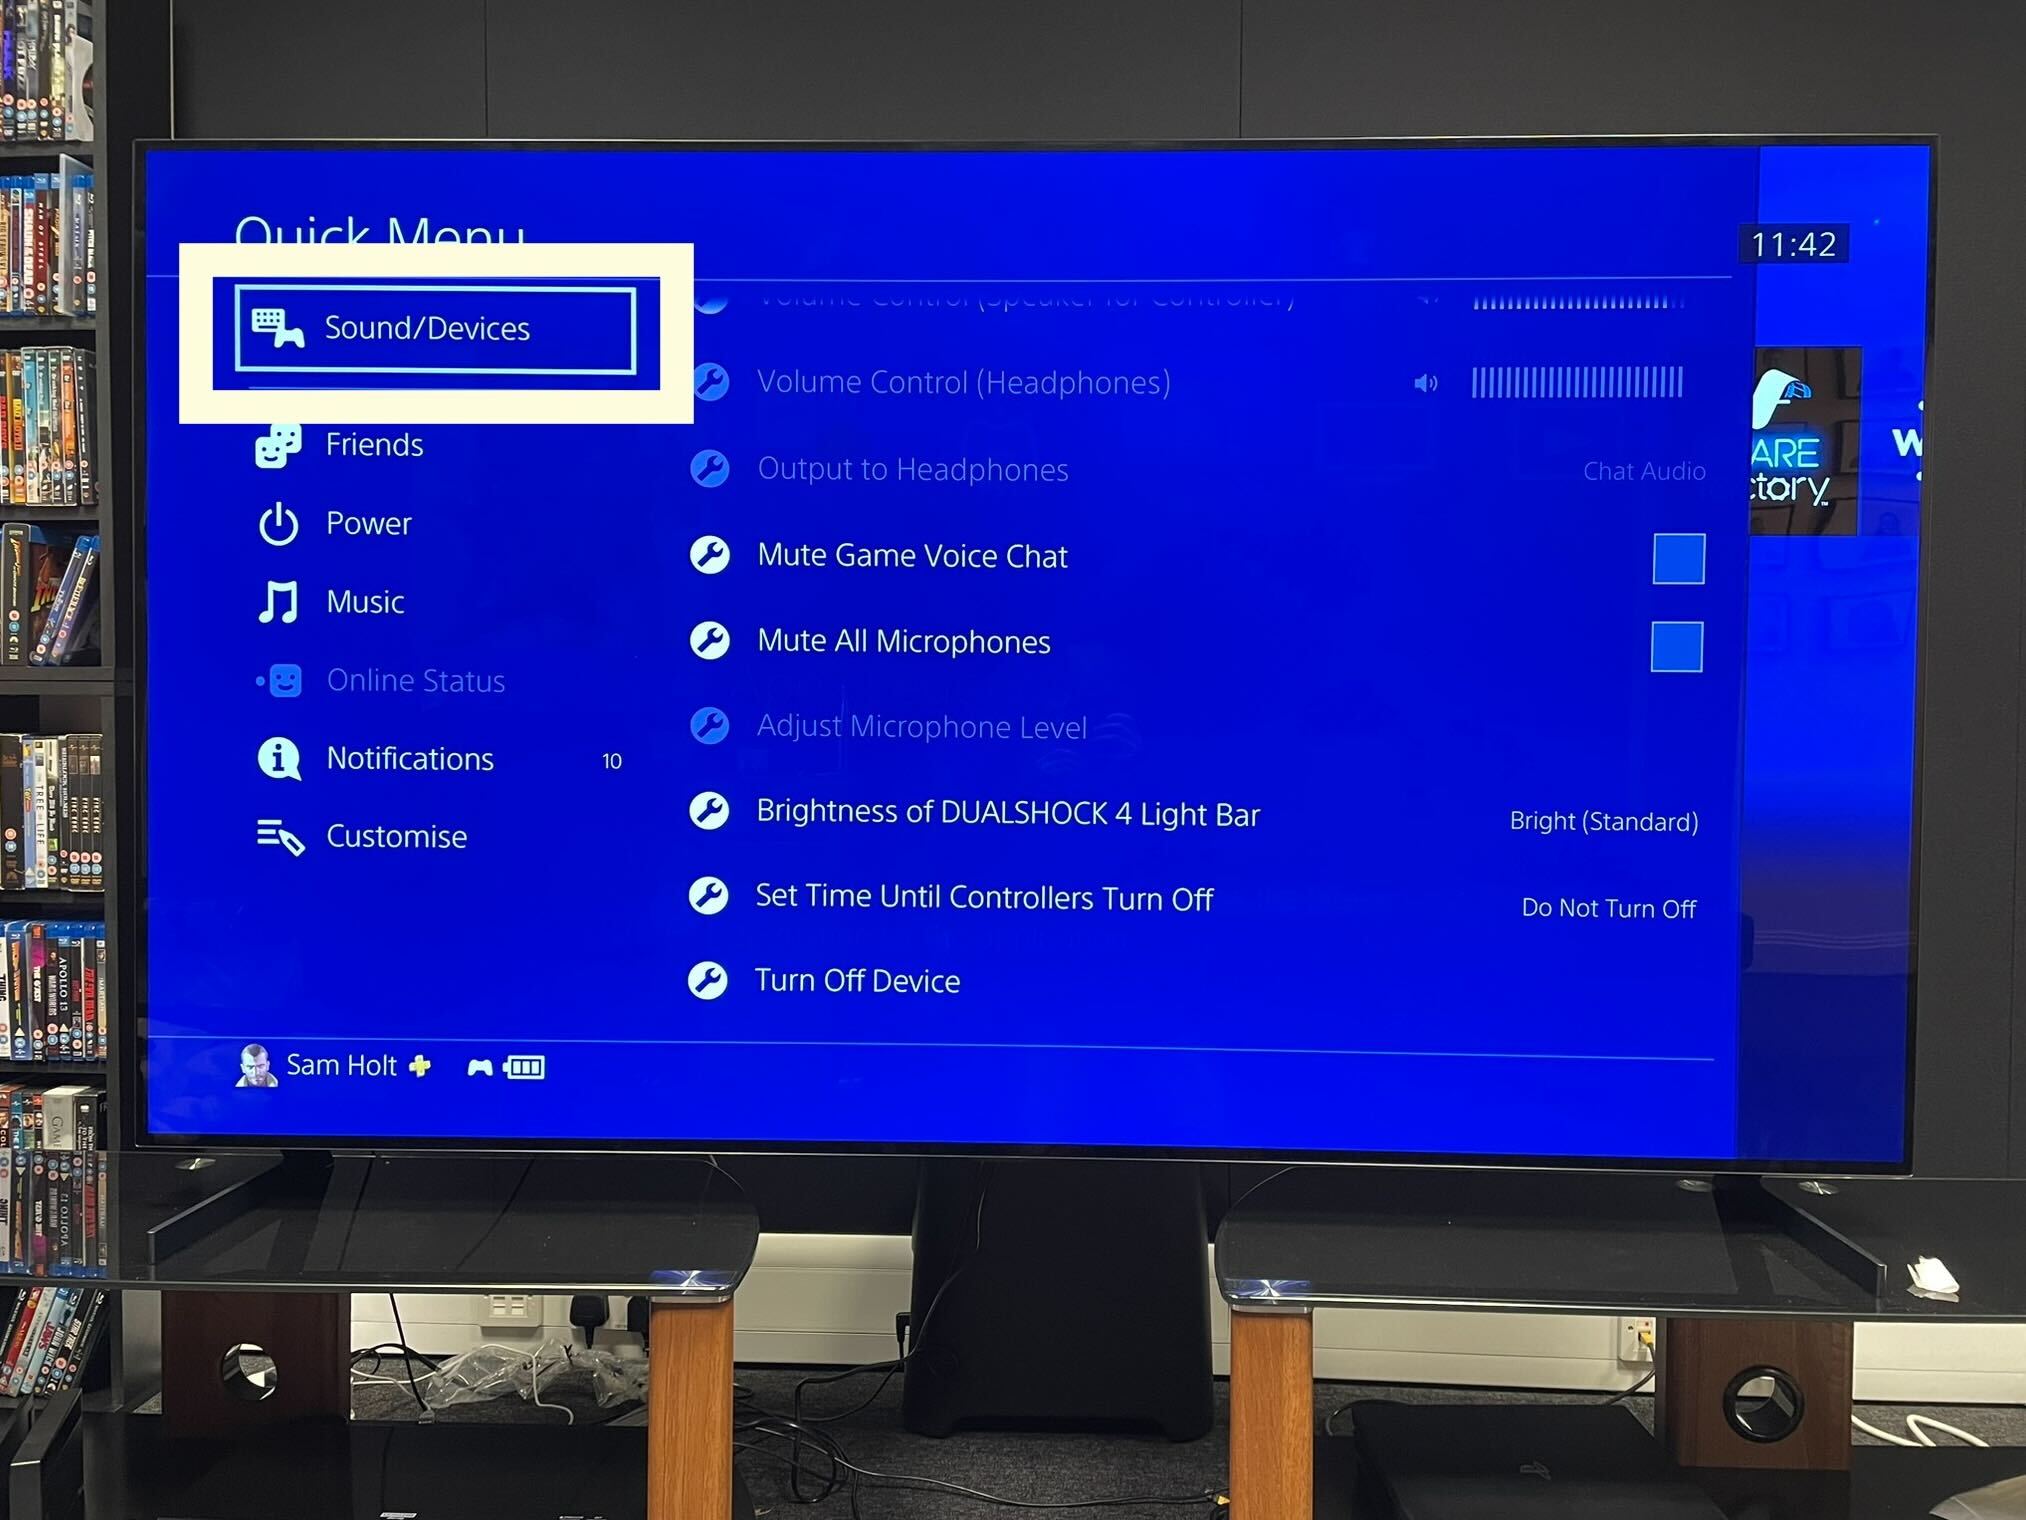 How to turn a PS4 off